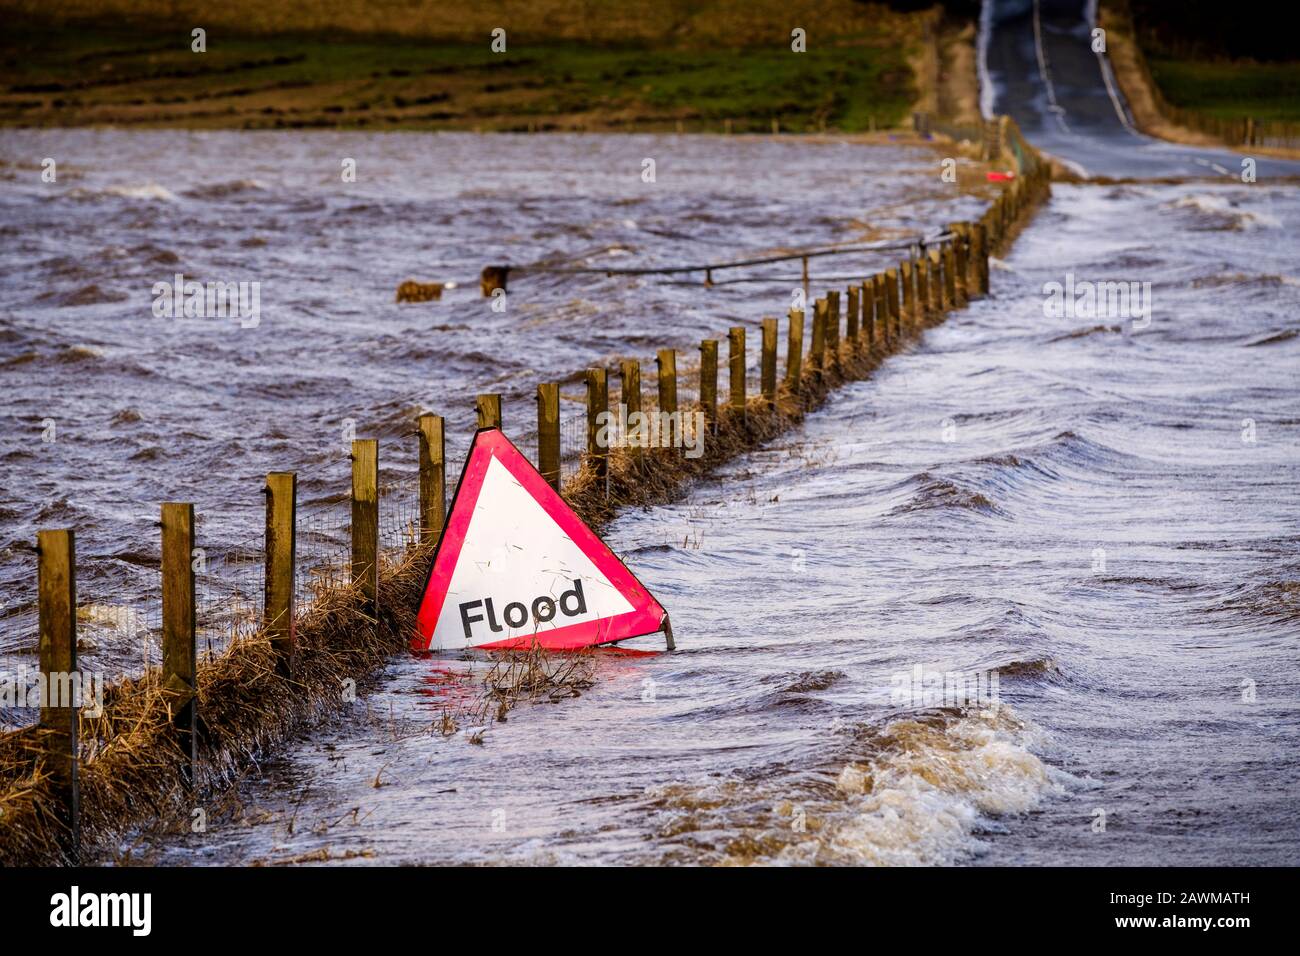 Storm Ciara causes the River Medwin (a tributary of the River Clyde) to